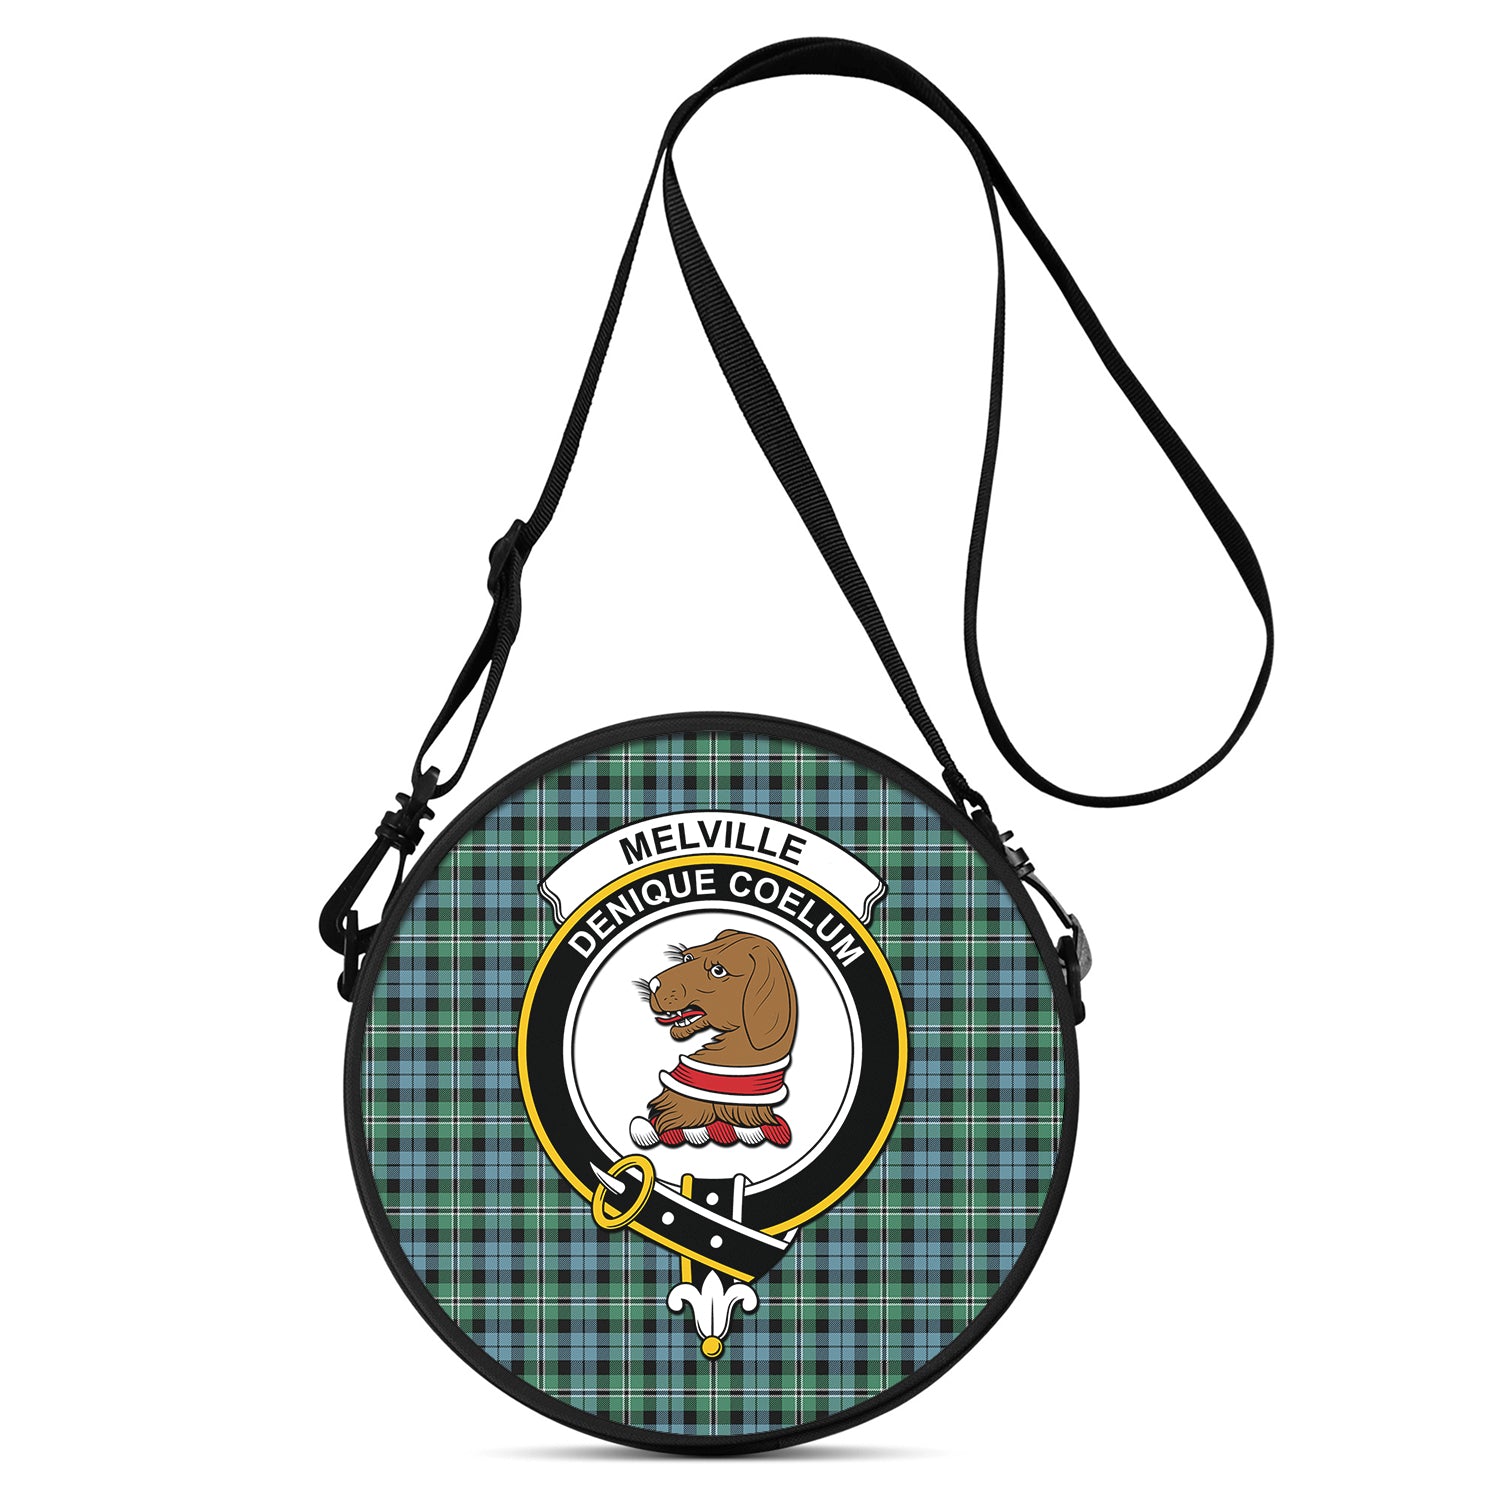 melville-ancient-tartan-round-satchel-bags-with-family-crest